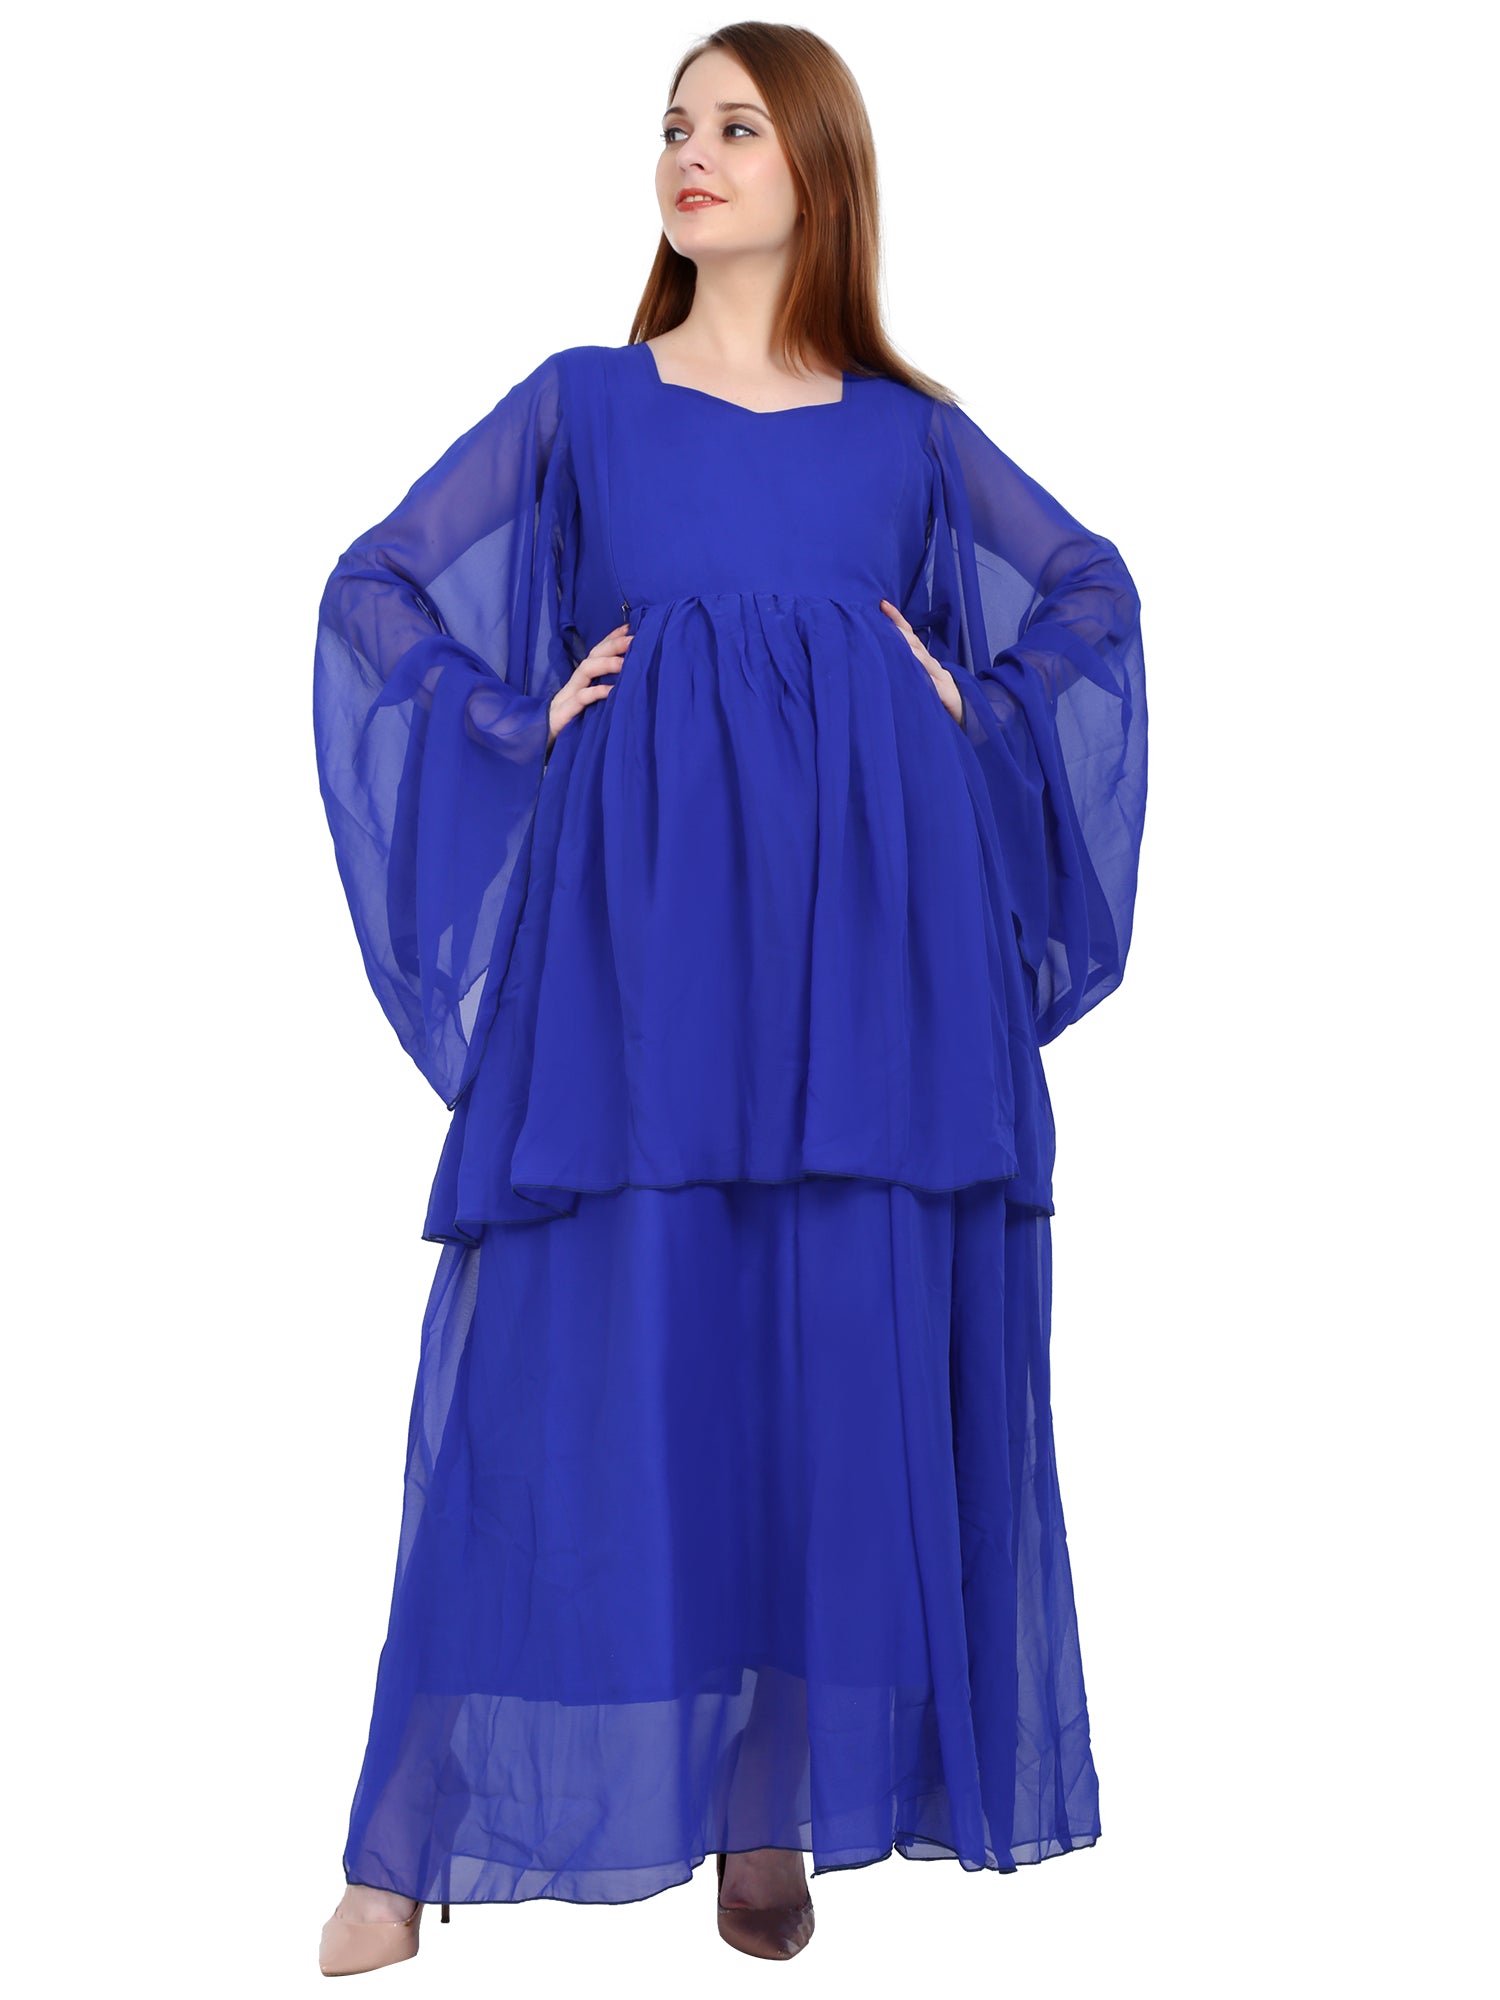 Made to Order Customised Royal Blue Maternity and Feeding Gown